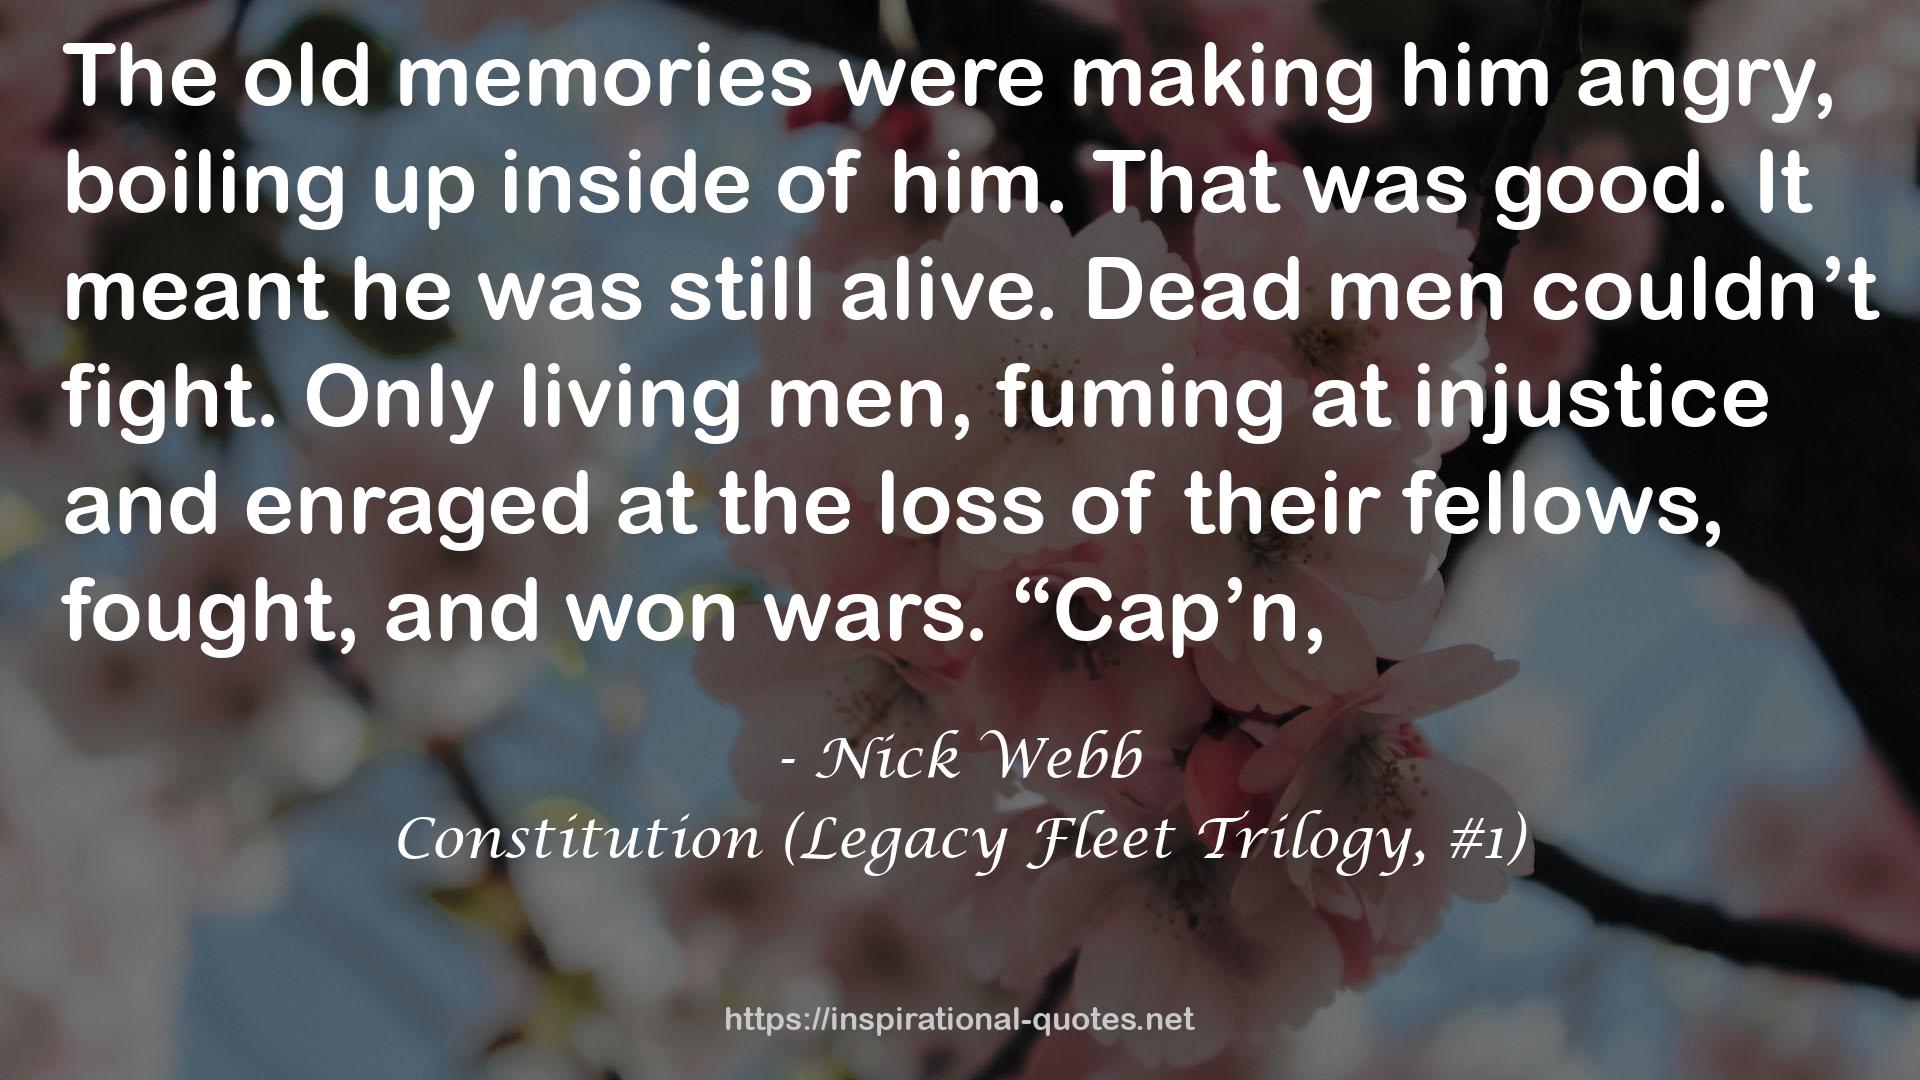 Constitution (Legacy Fleet Trilogy, #1) QUOTES